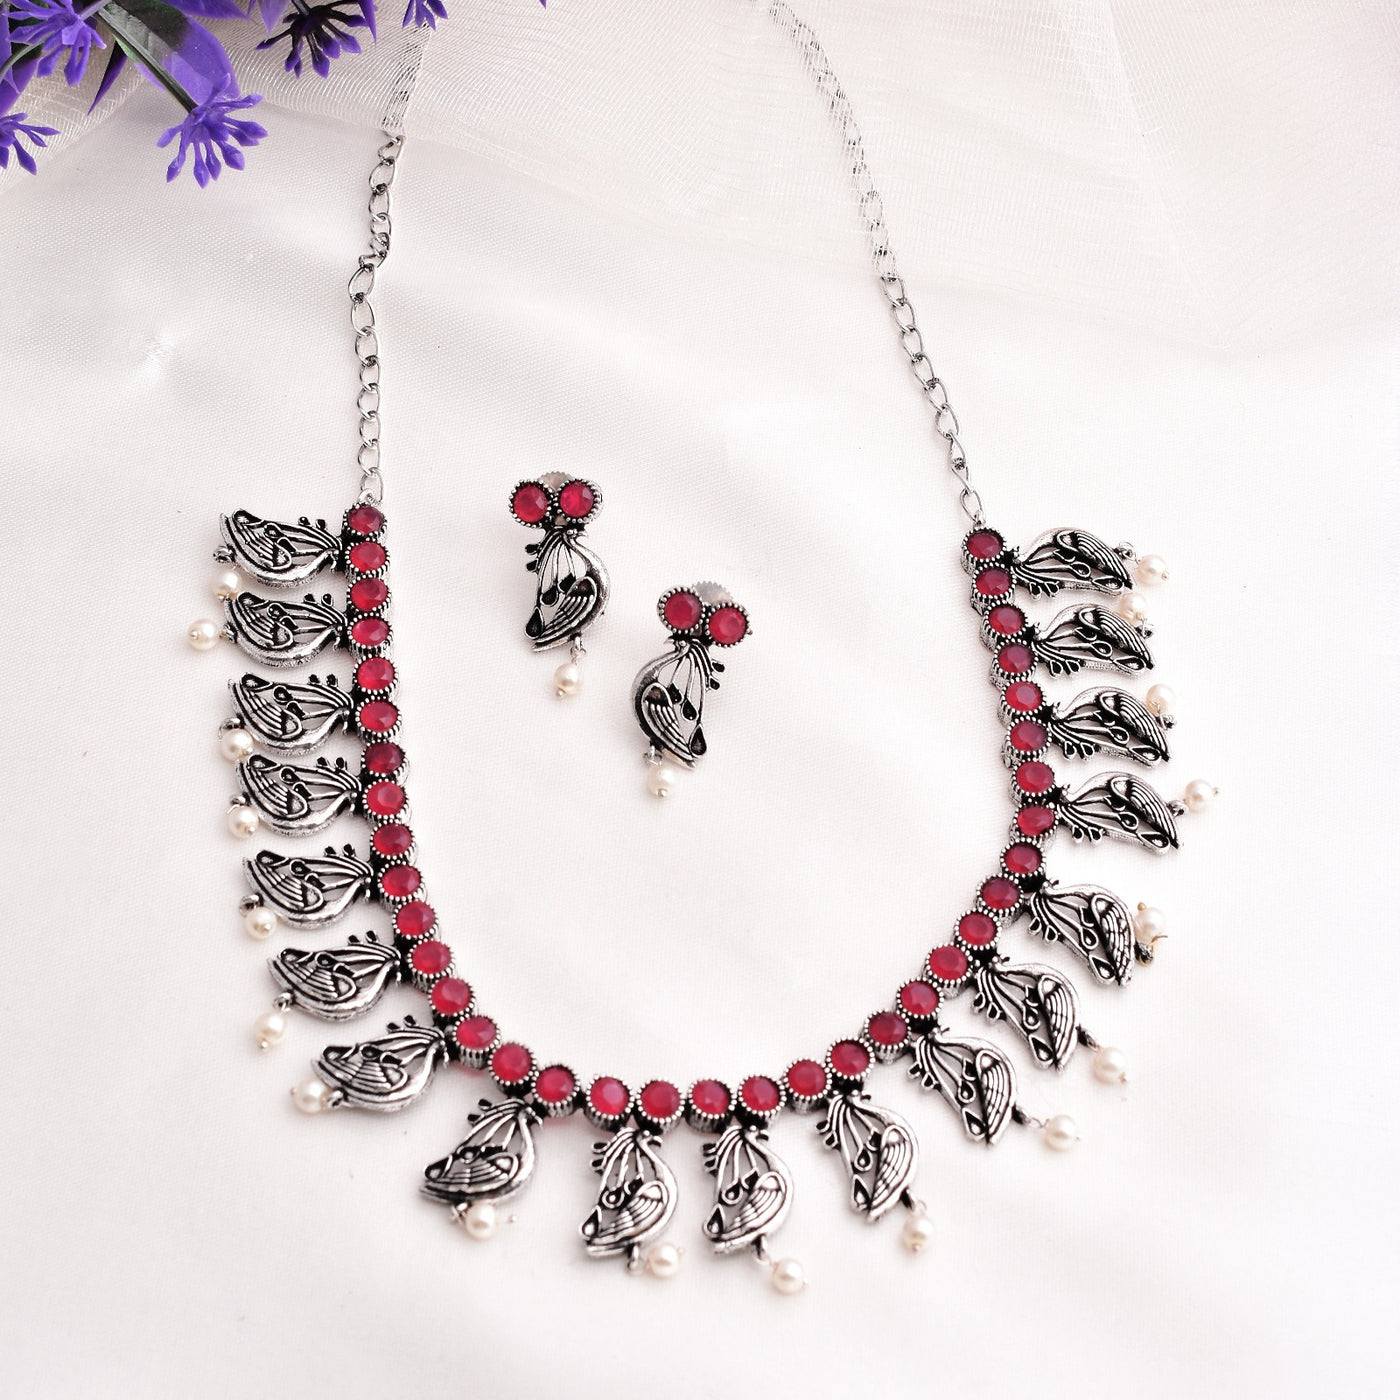 Pragya Peacock Design Necklace with Matching Earrings